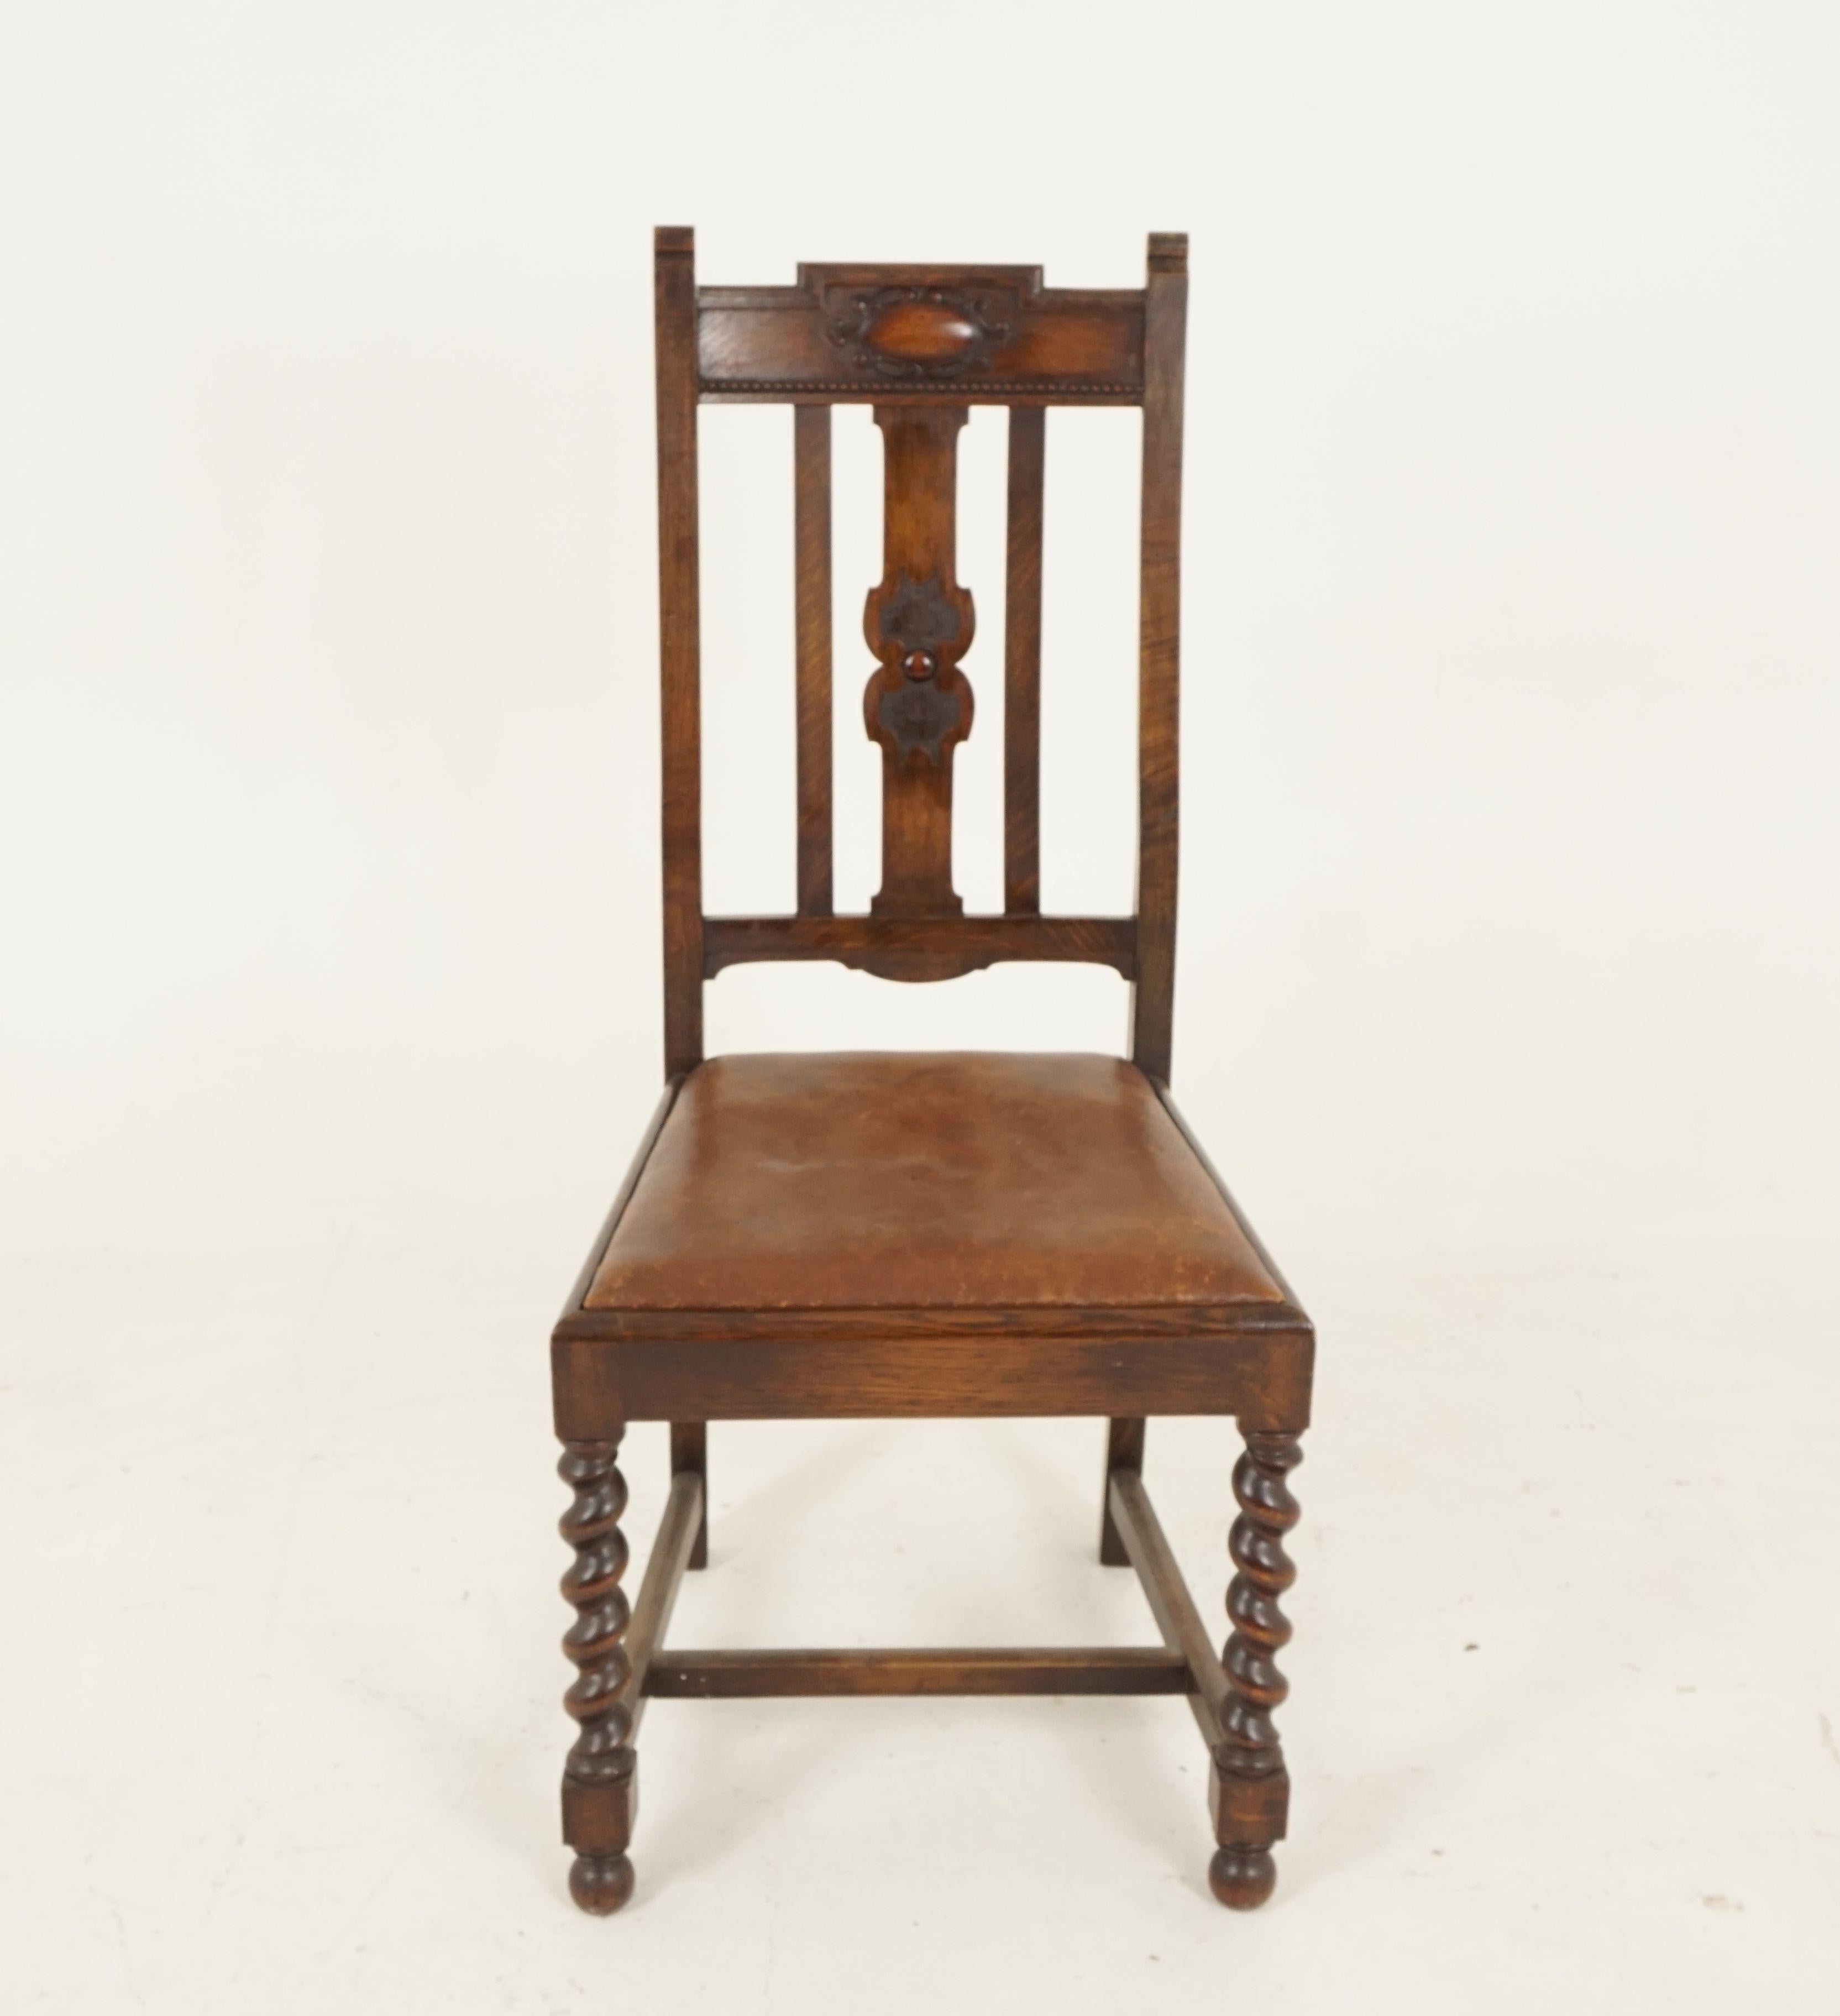 6 antique dining chairs, oak barley twist, set of 6, Scotland 1920, B2210

Scotland 1920
Solid oak
Original finish
Carved moulded top rail
Central carved vertical rail
Flanked by a pair of plain rails
Lift out seat below with original